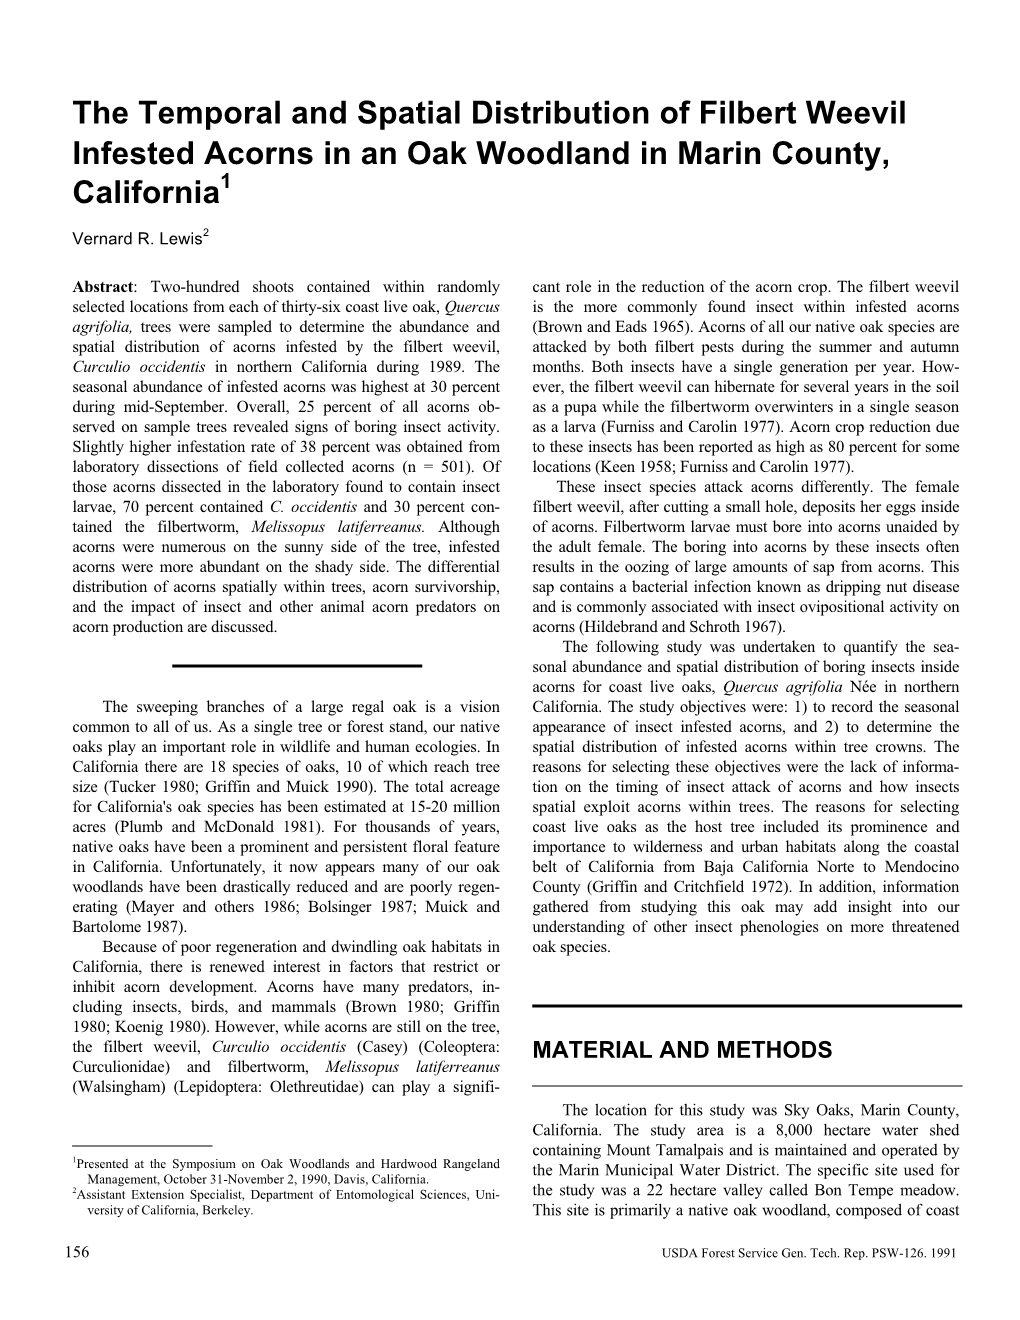 The Temporal and Spatial Distribution of Filbert Weevil Infested Acorns in an Oak Woodland in Marin County, California1